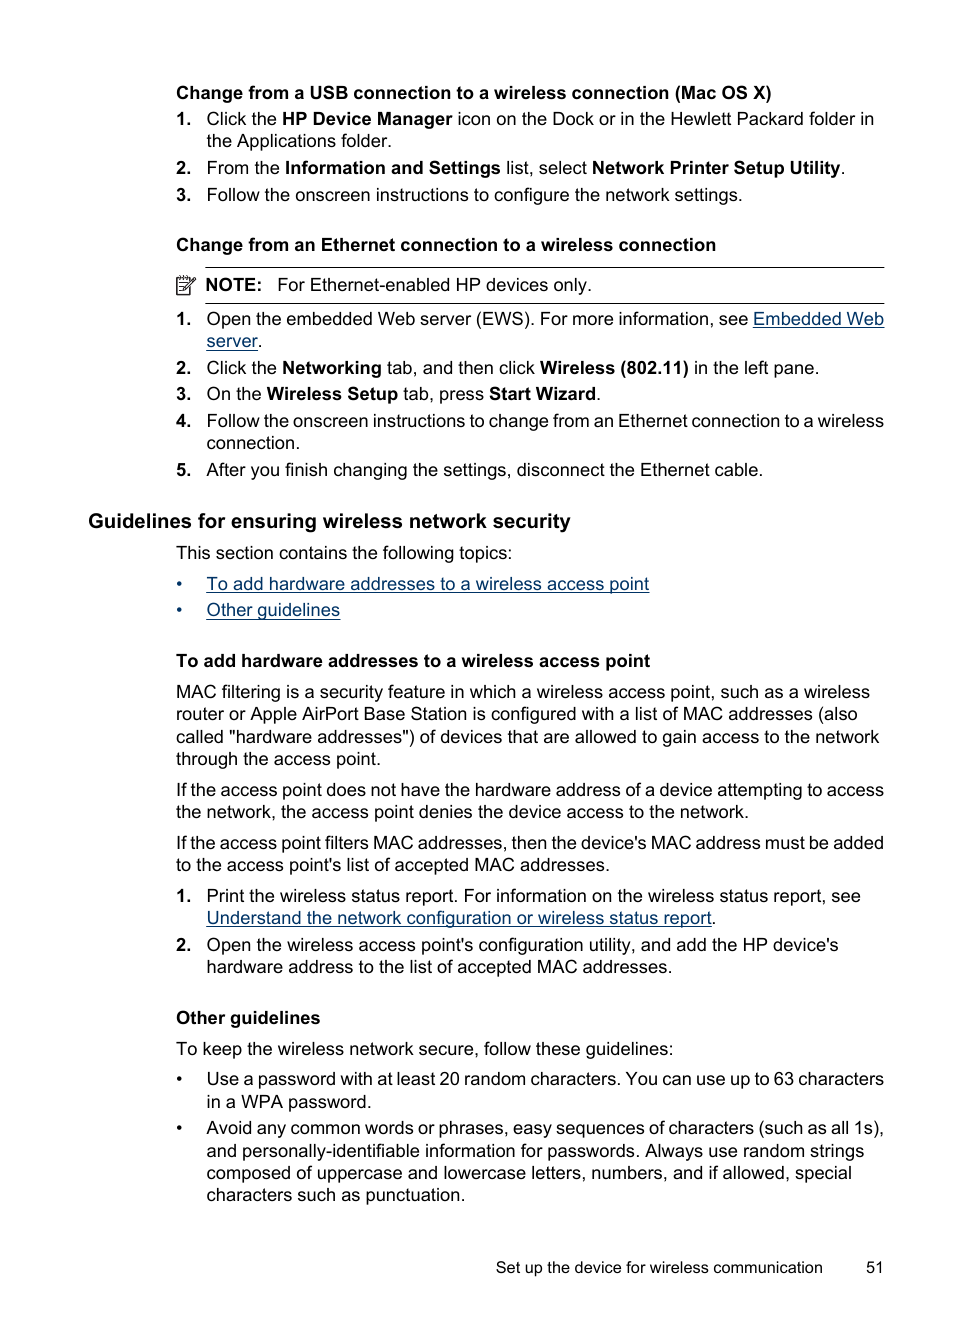 Guidelines for ensuring wireless network security, Other guidelines | HP Officejet 6000 User Manual | Page 55 / 168